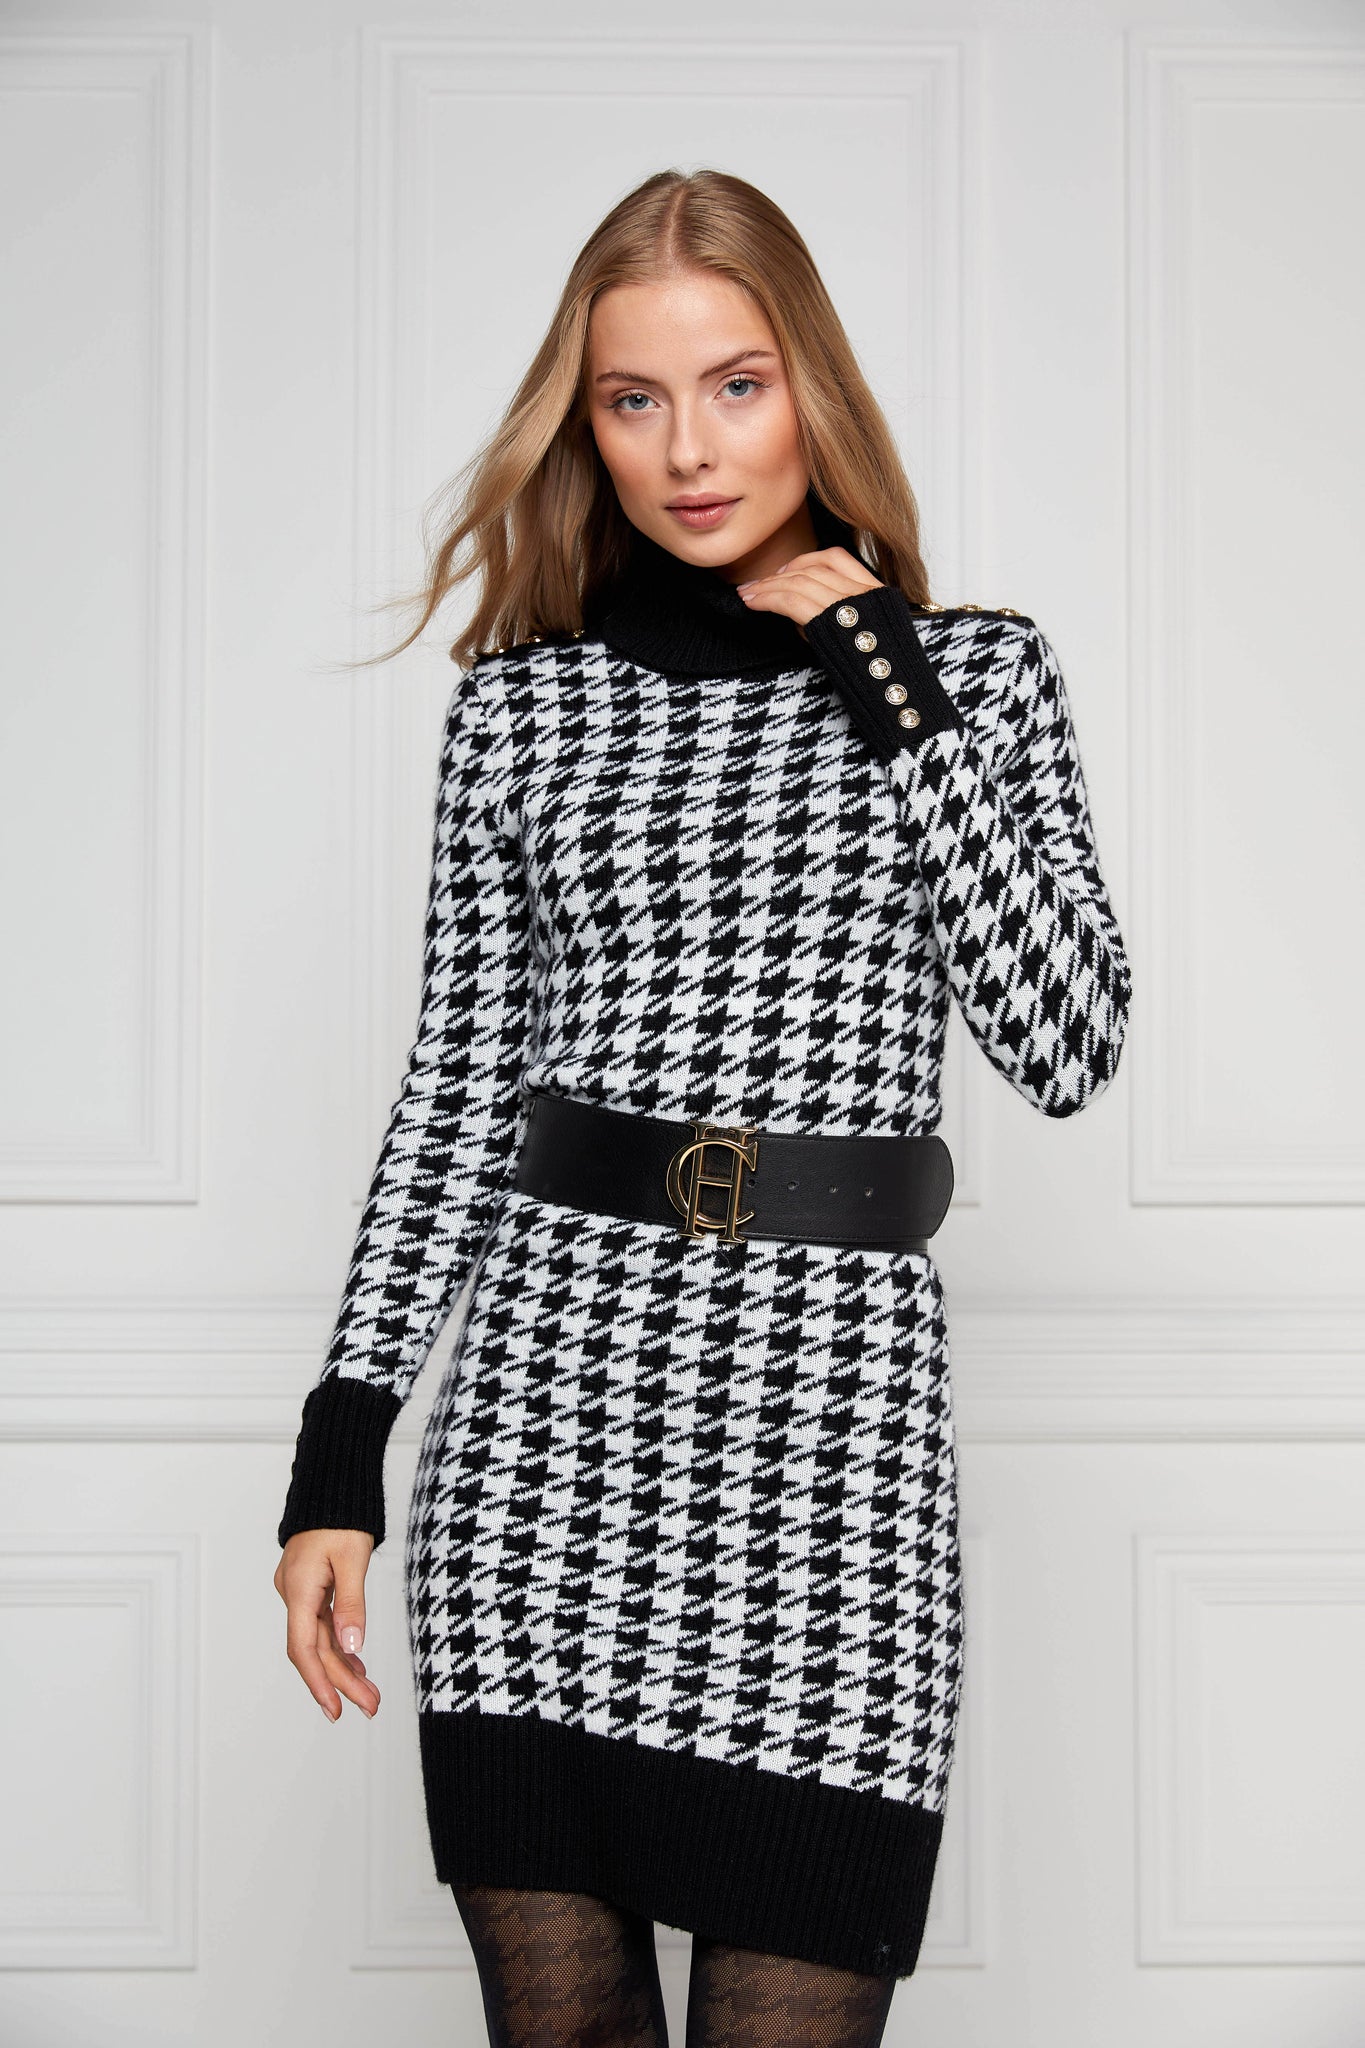 womens black and white houndstooth roll neck jumper dress with contrast black cuffs and ribbed hem with gold button detail on the cuffs and shoulders worn with wide black belt